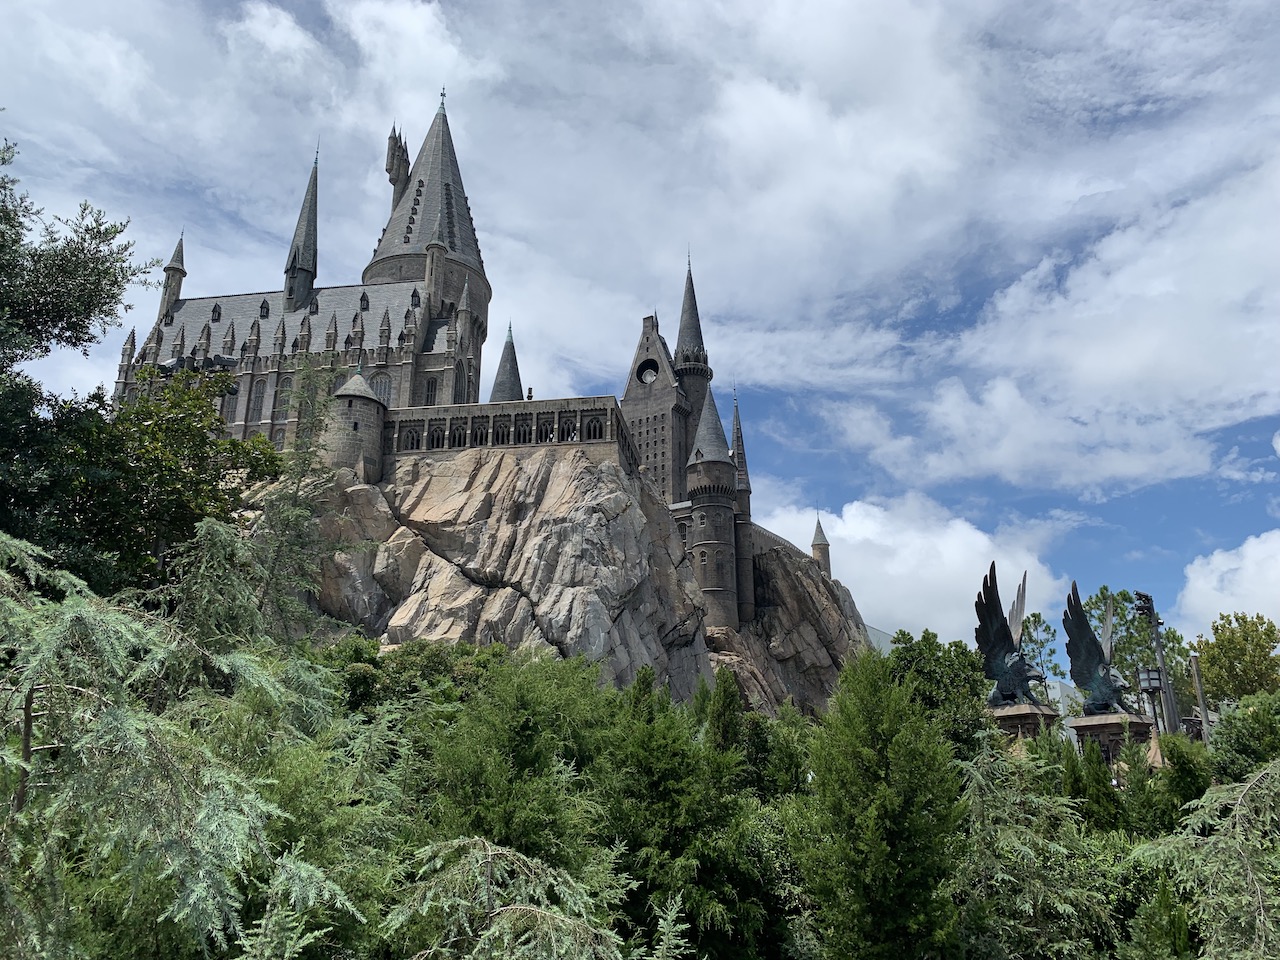 https://www.mousehacking.com/blog/universals-islands-of-adventure-rides-guide